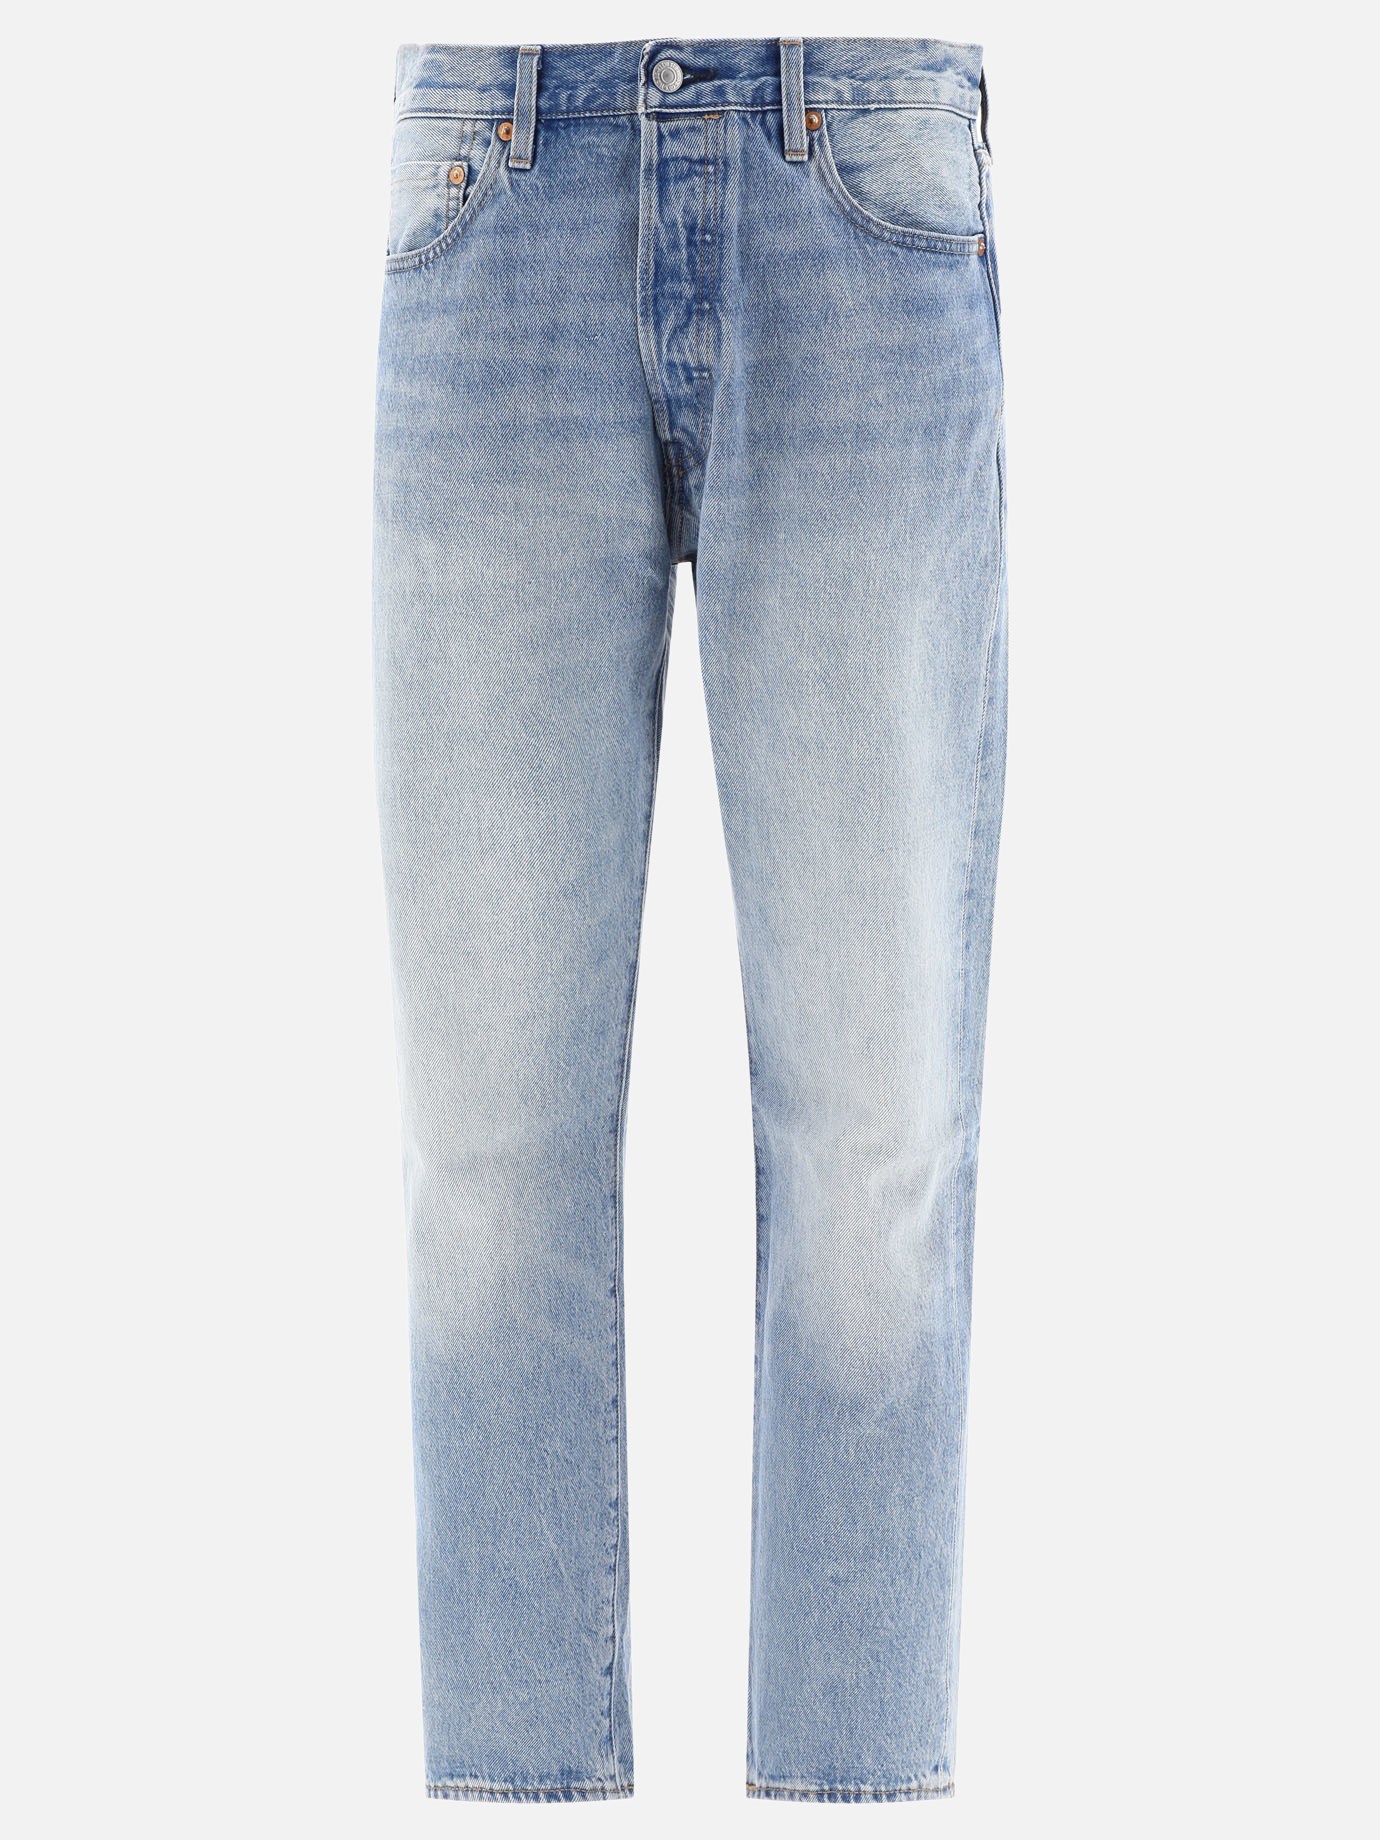  501  jeans by Levi's Made & Crafted